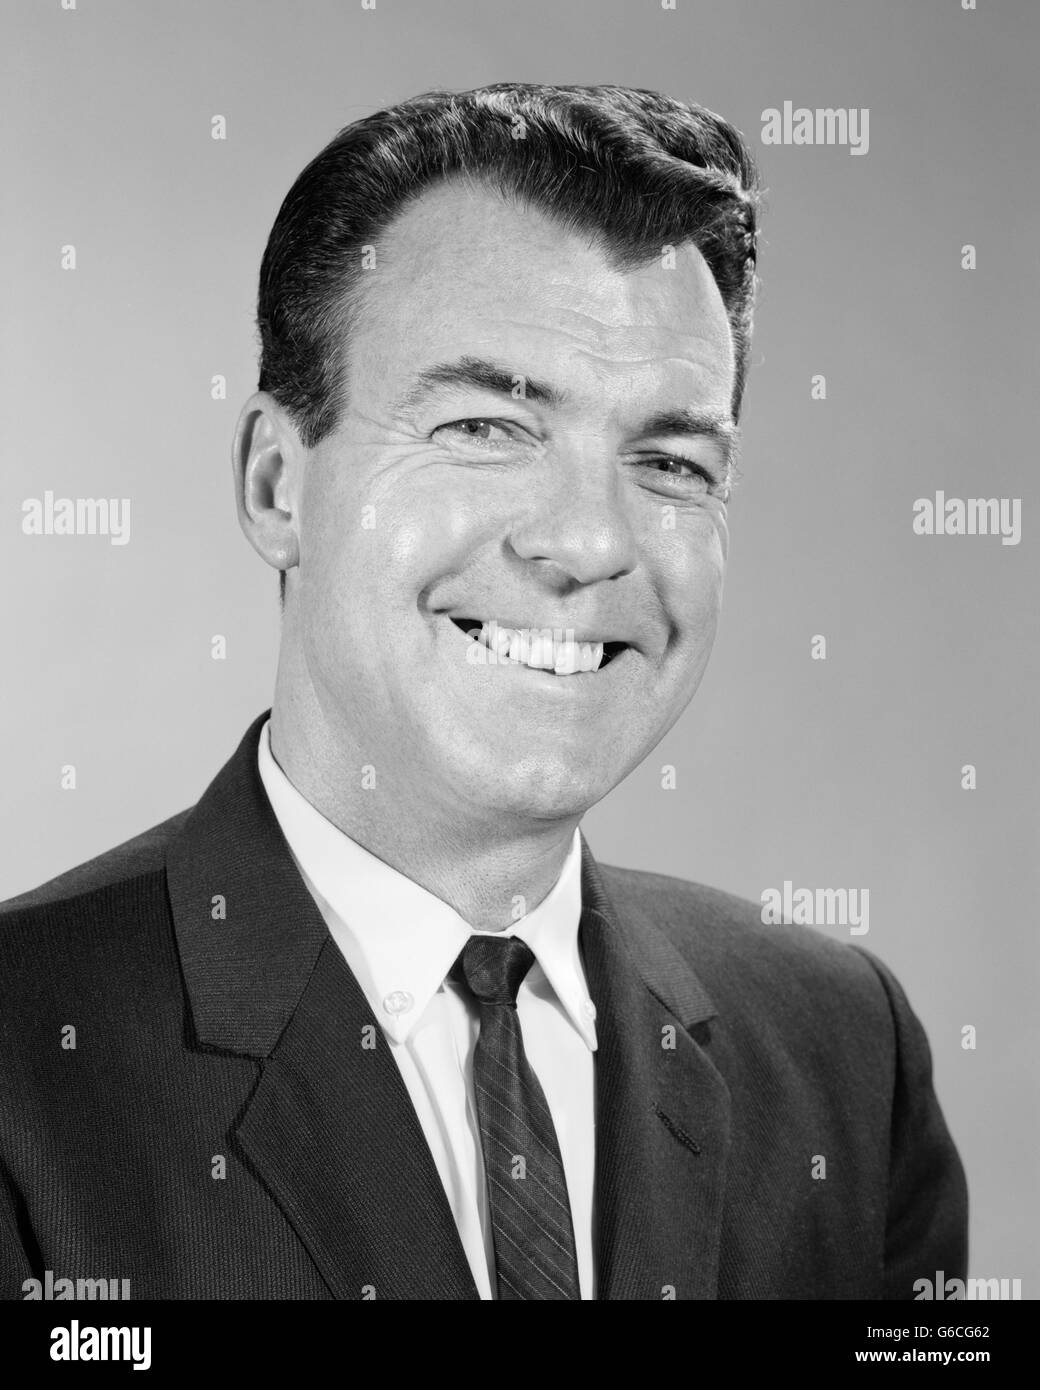 1960s SMILING BUSINESS MAN PORTRAIT WEARING SUIT TIE LOOKING AT CAMERA Stock Photo